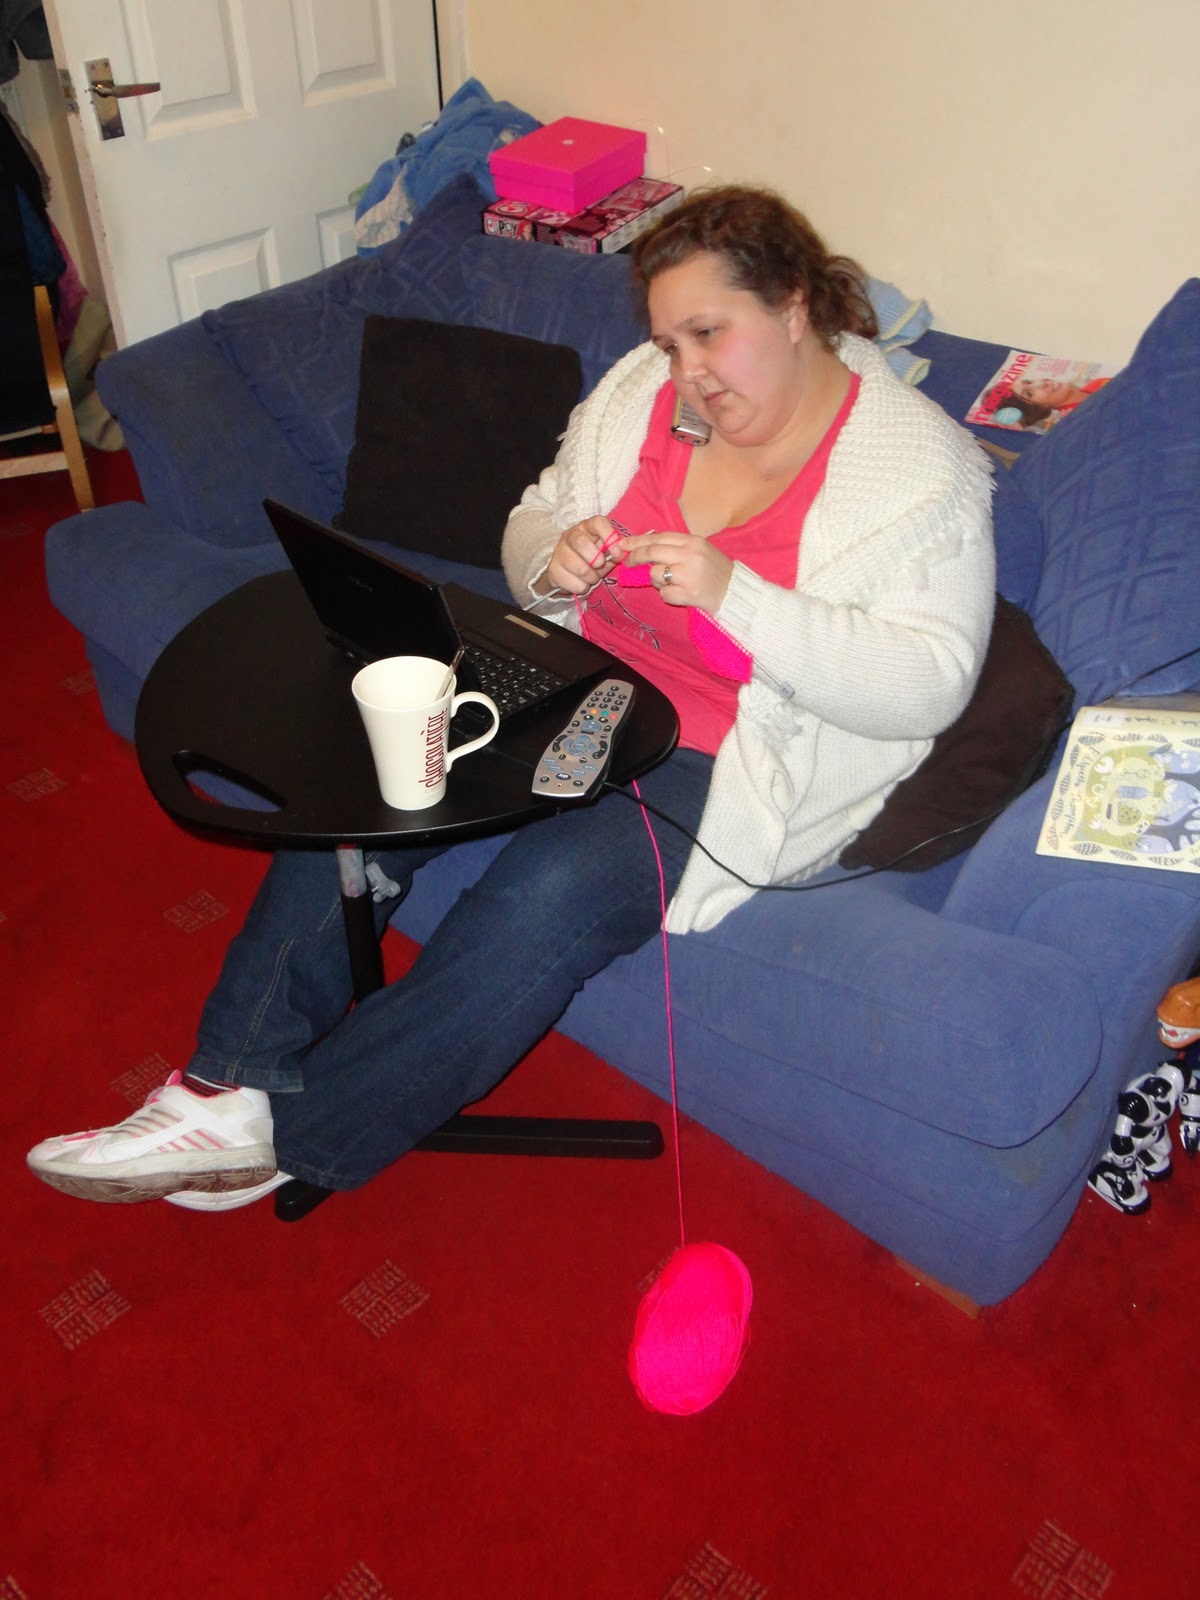 PippaD back in 2012, knitting, on the phone, drinking, on the laptop and reading...